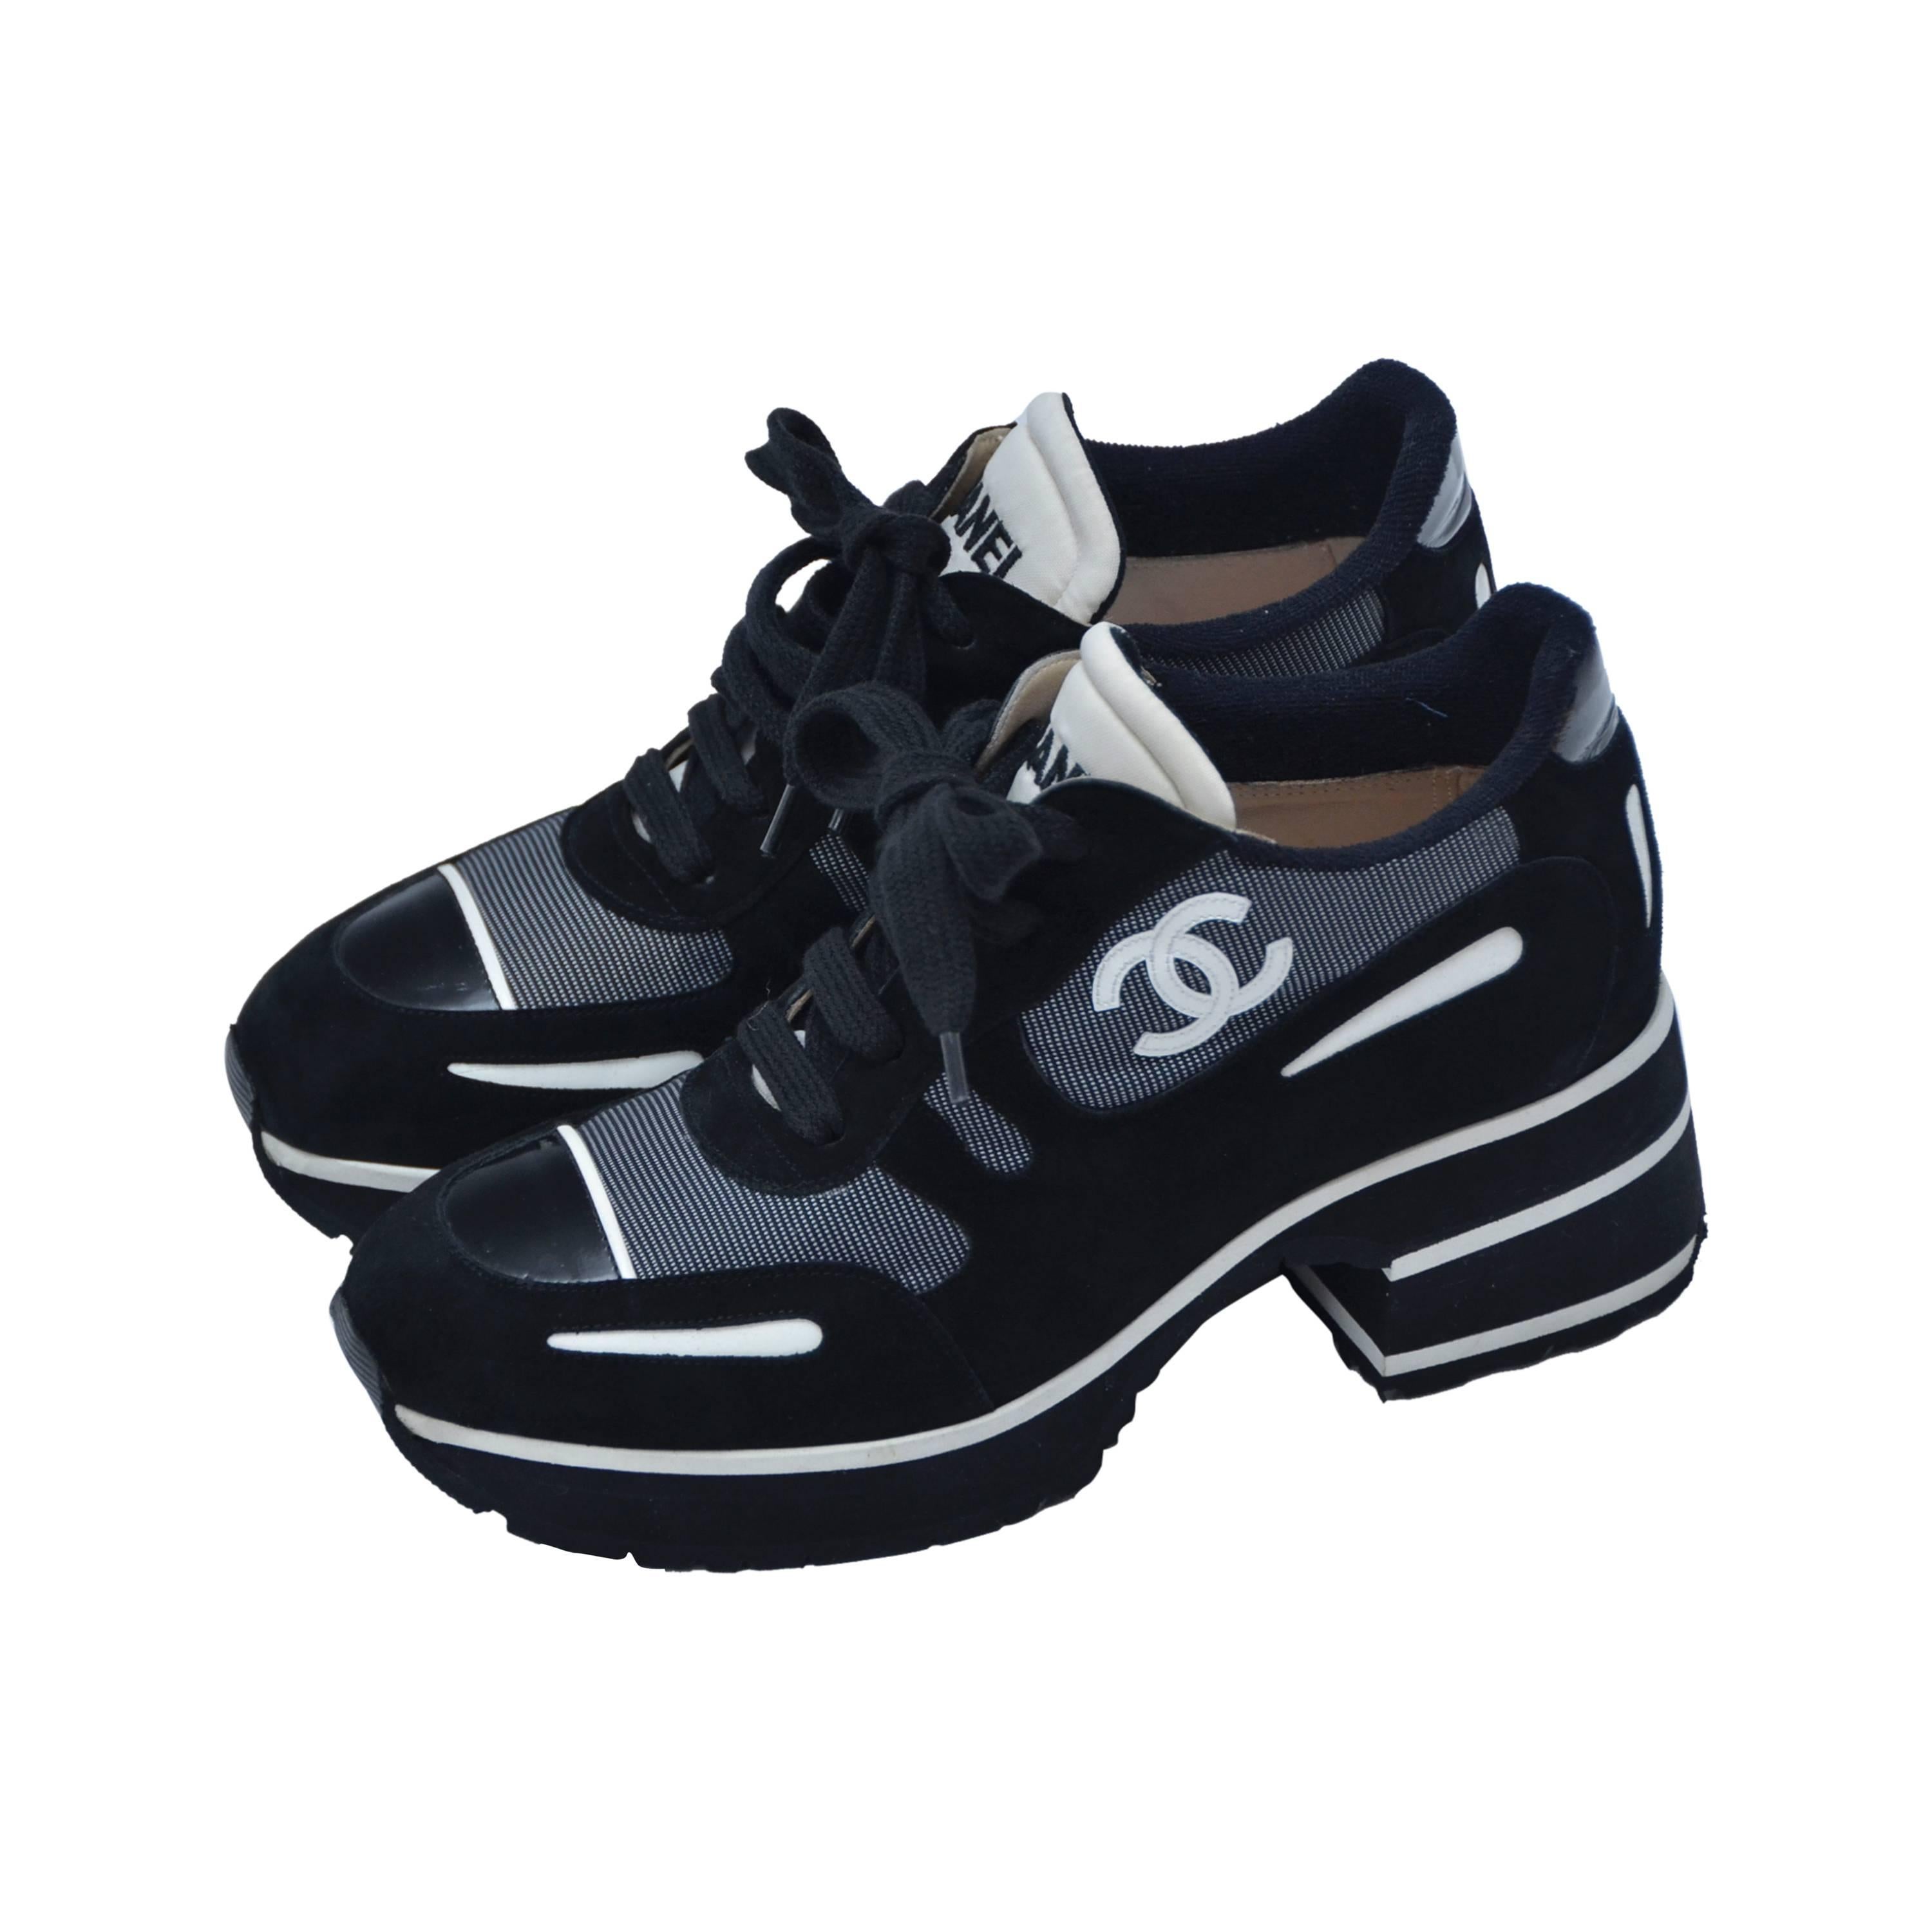 CHANEL  1997 Platform Black/White Shoes Sneakers New 38.5